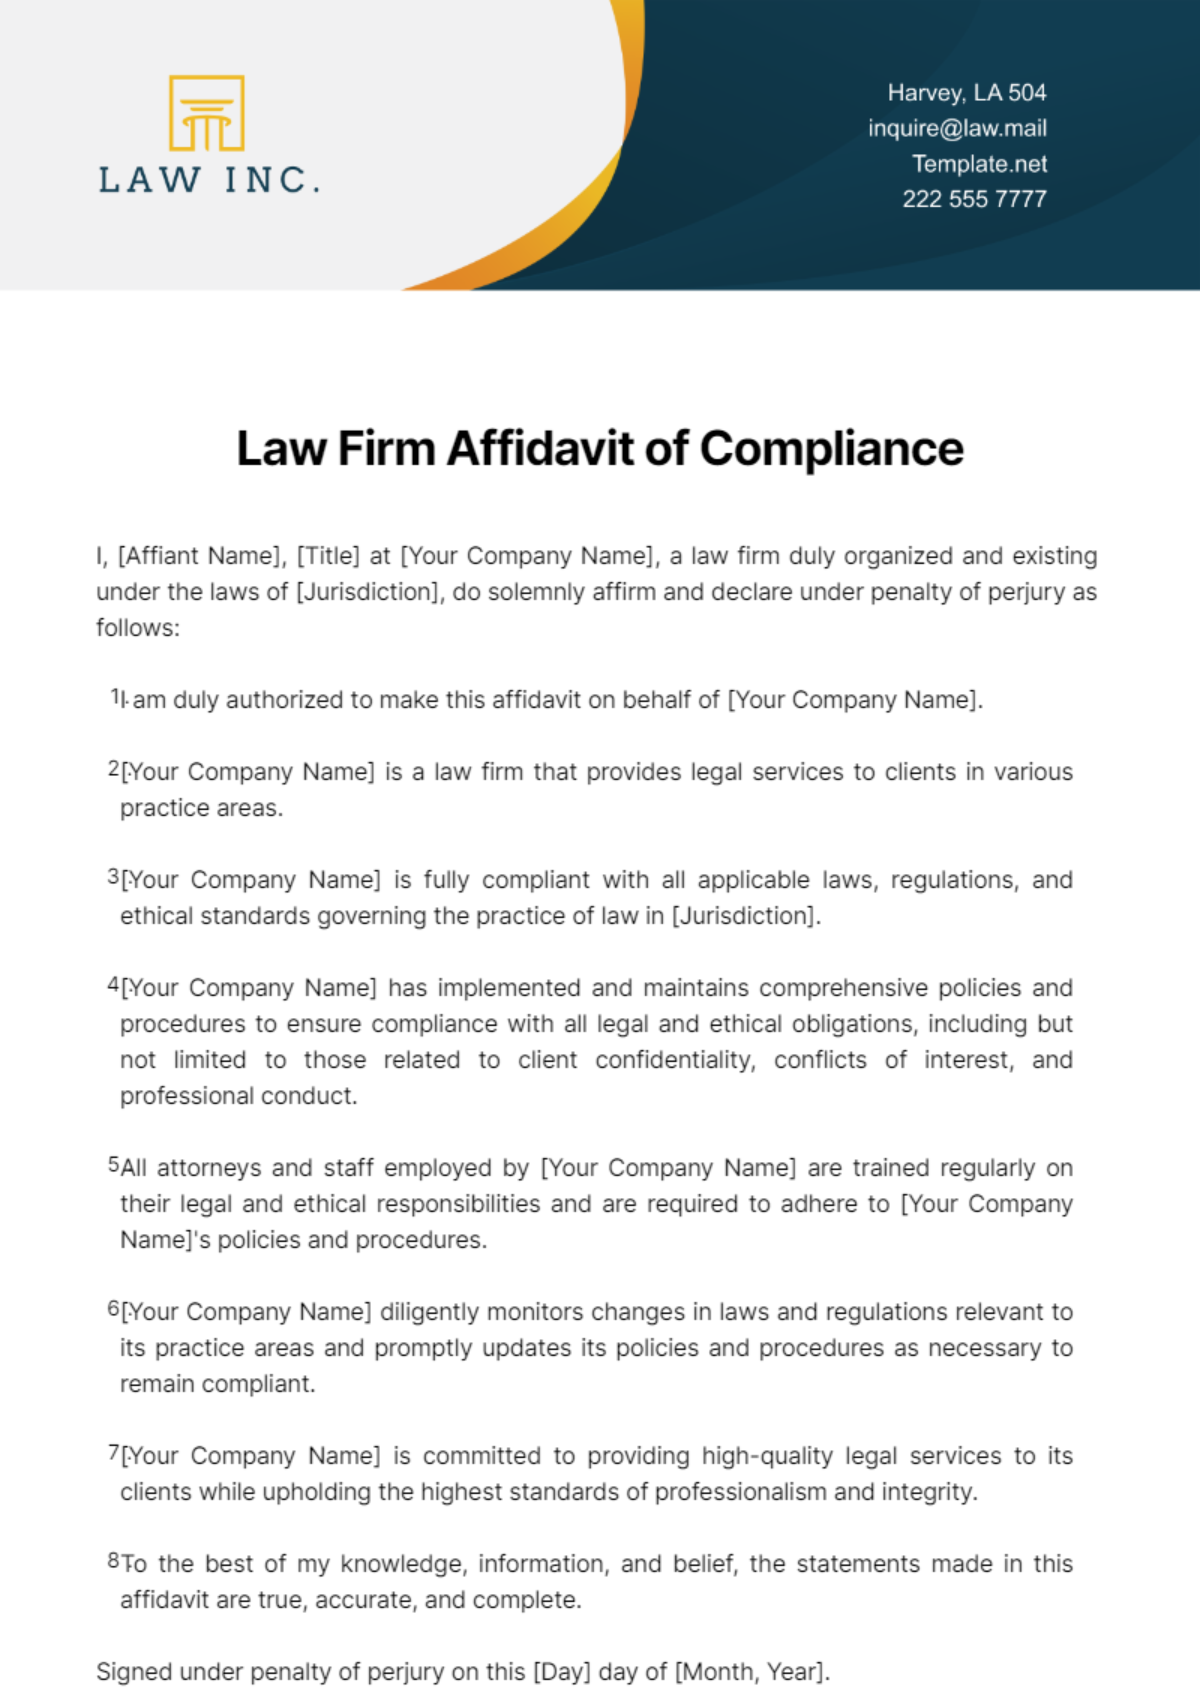 Law Firm Affidavit of Compliance Template